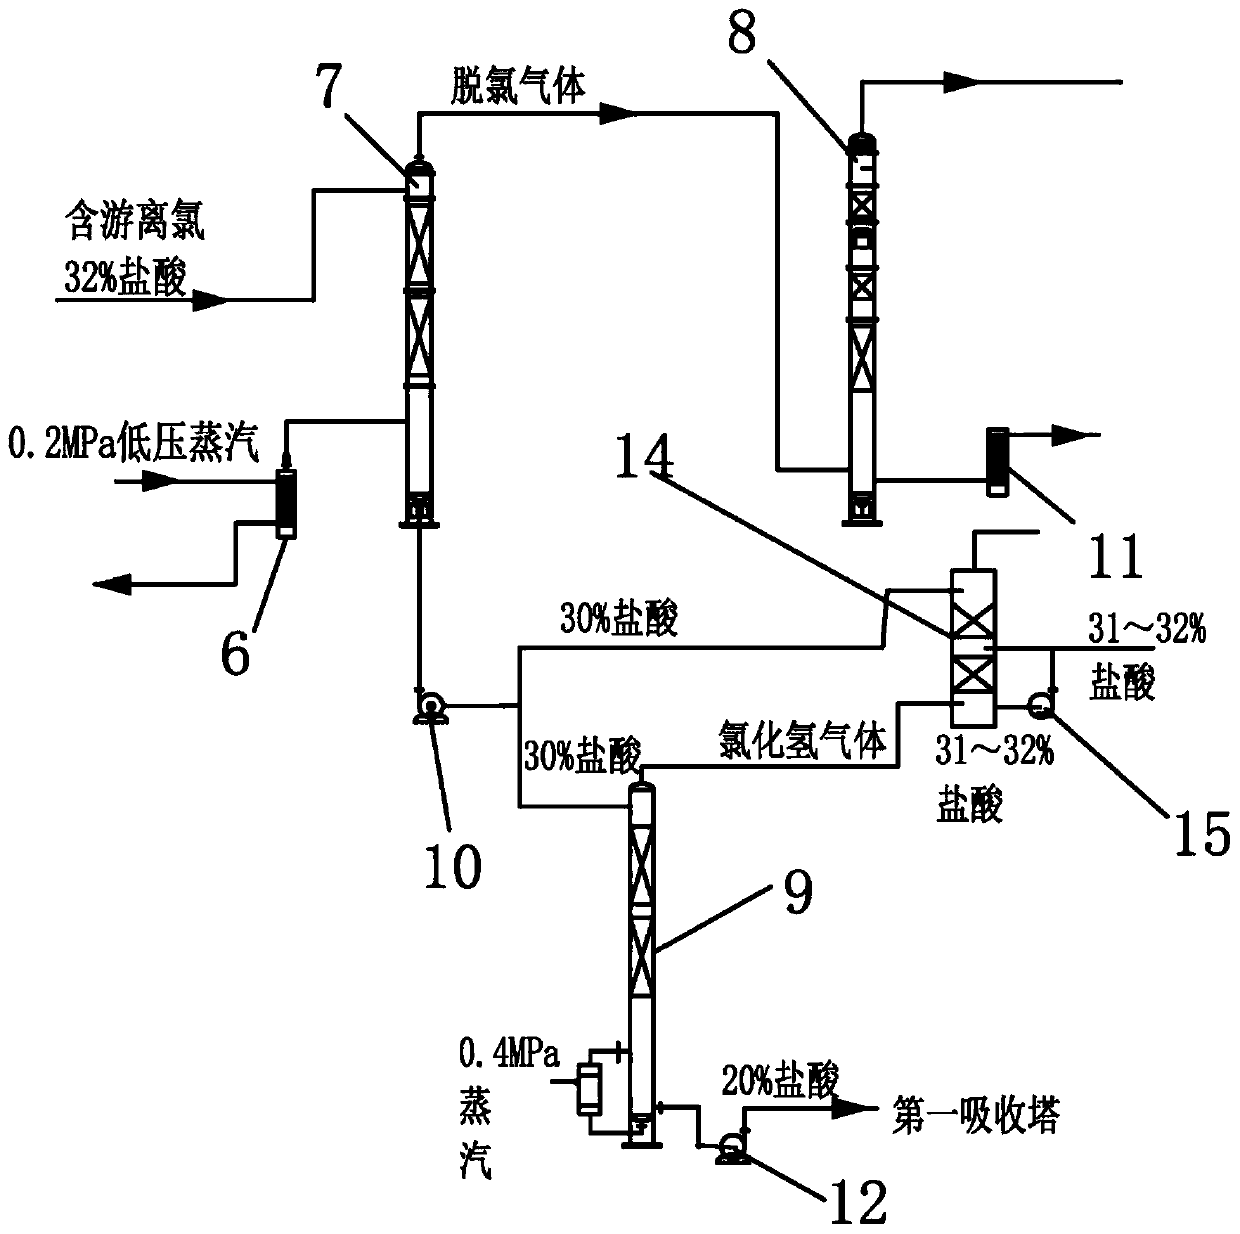 Chlorination section byproduct hydrogen chloride gas absorption and purification acid-forming system and process